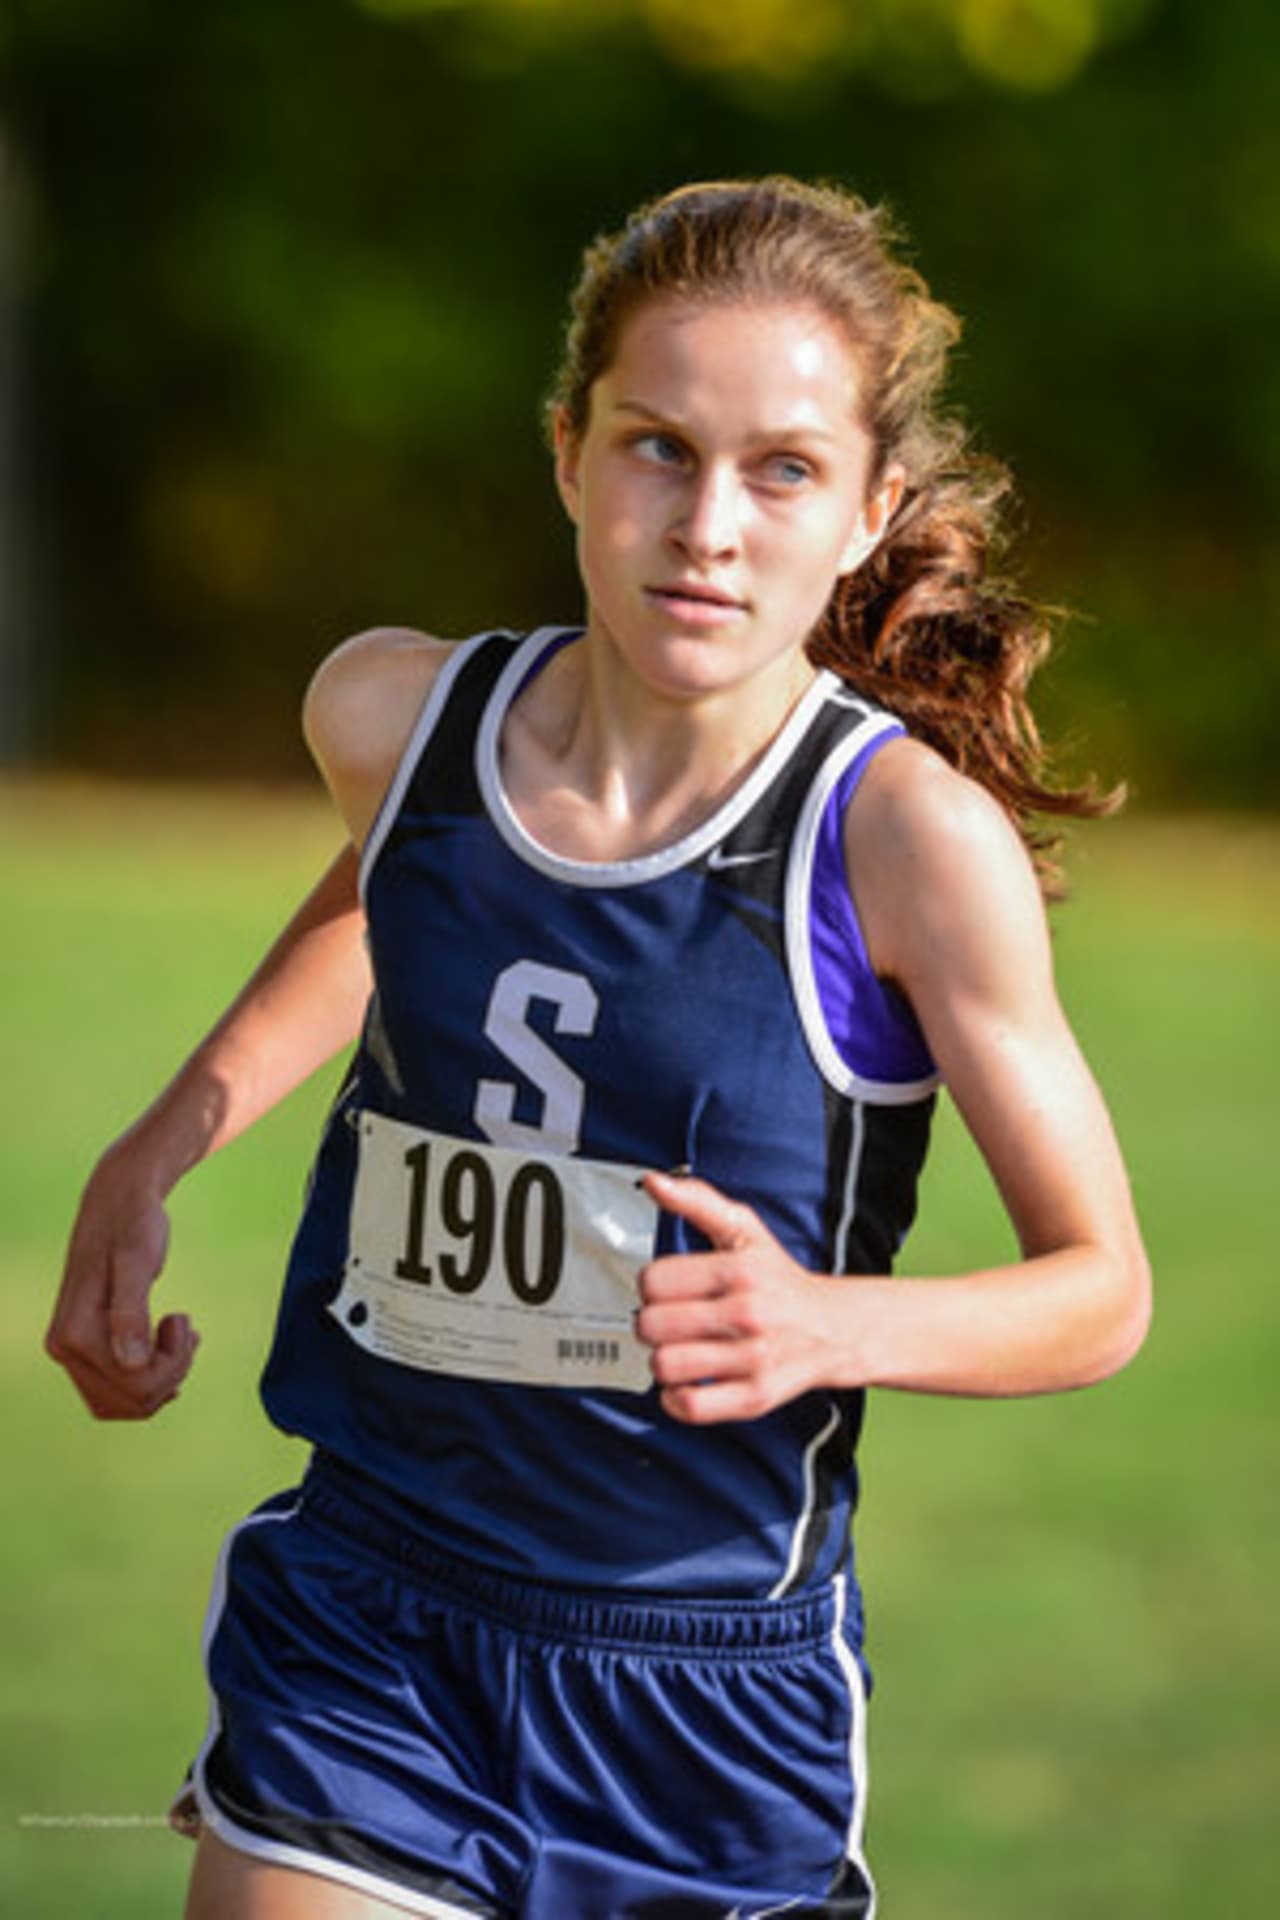 Staples runner Hannah DeBalsi was named the Gatorade Girls Cross Country Runner of the Year for the second straight year.